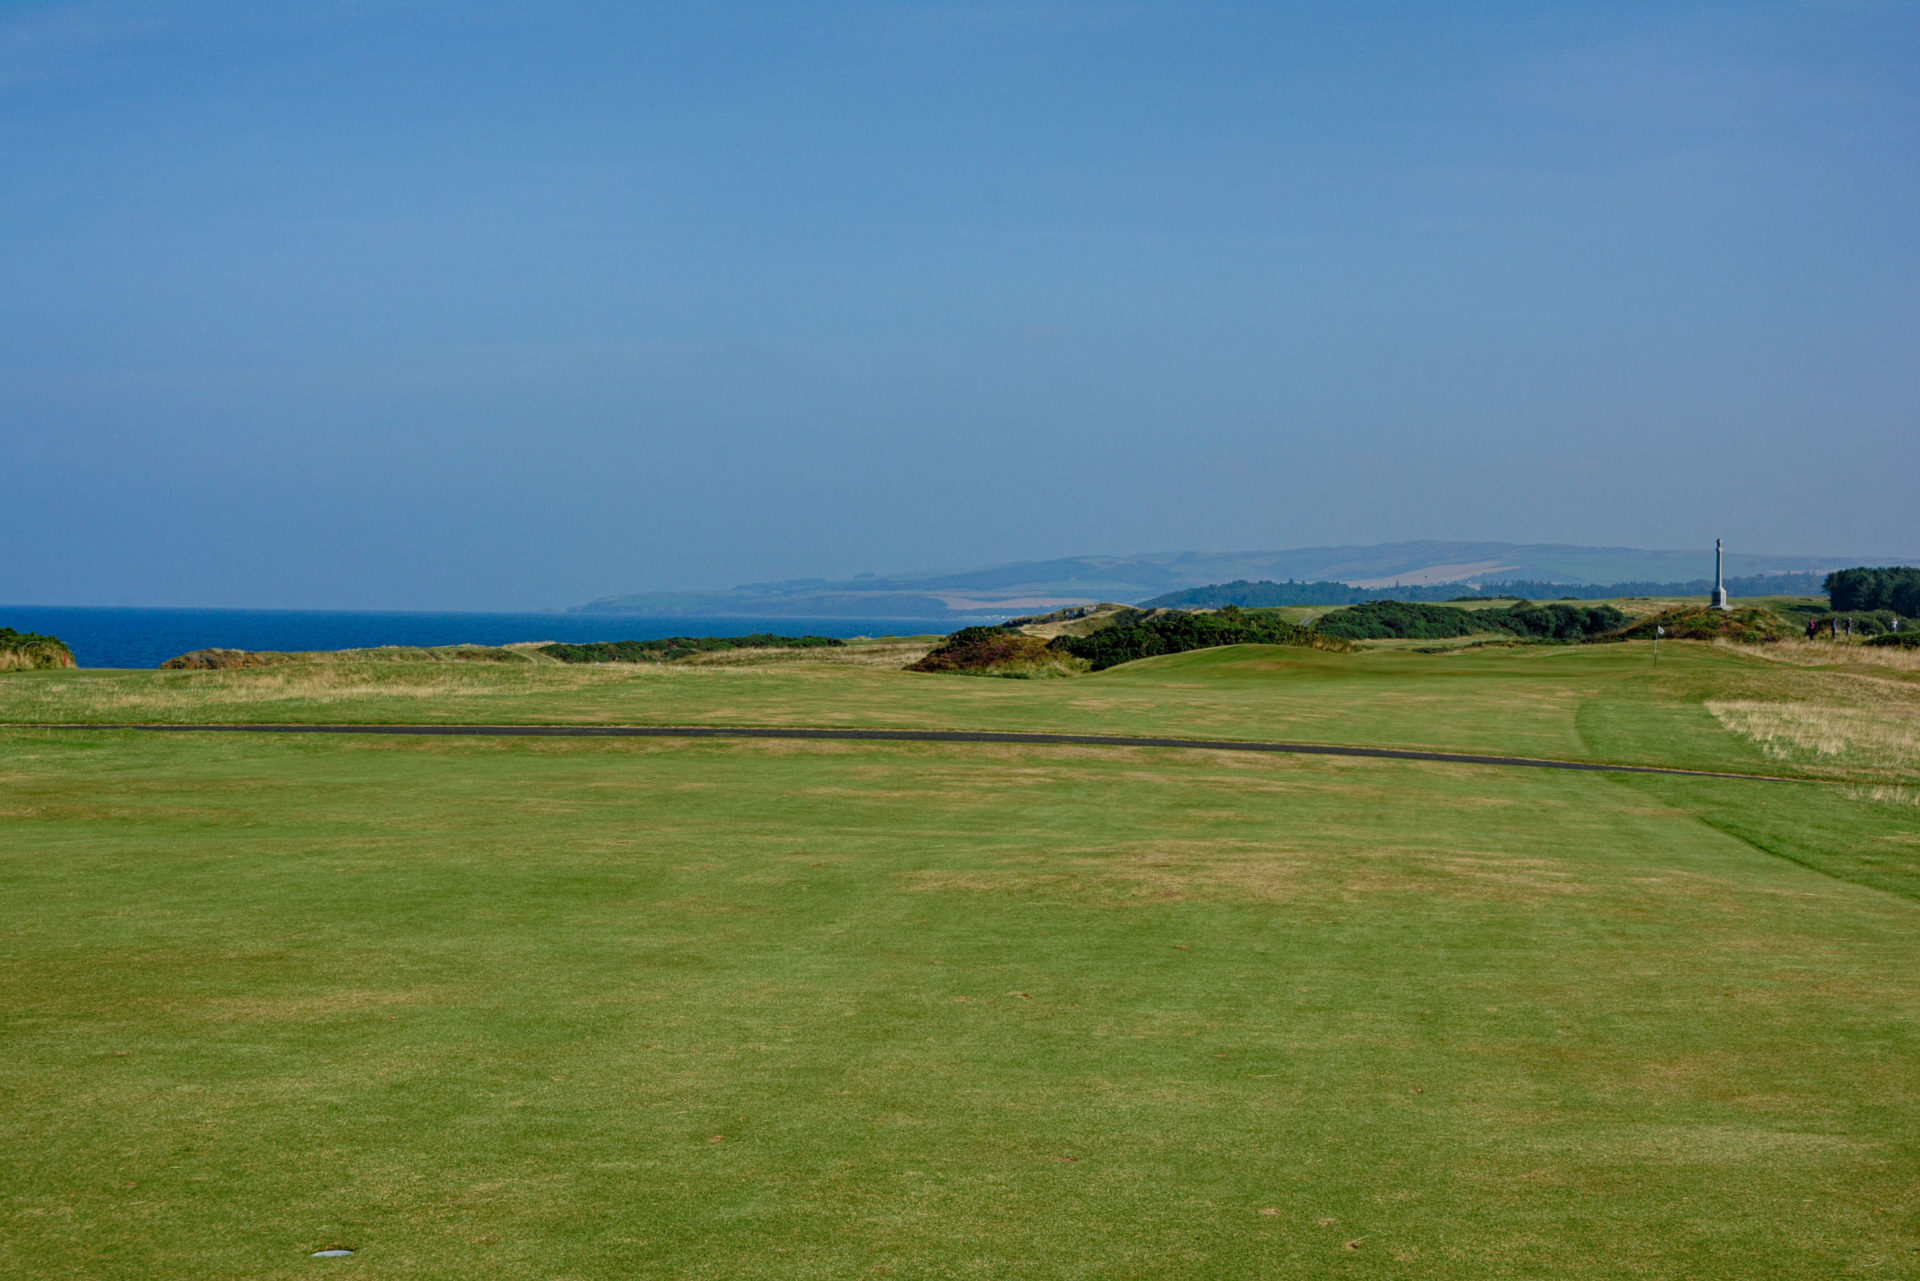 The Ailsa Course at Turnberry is one of the best golf courses in Scotland and the world.